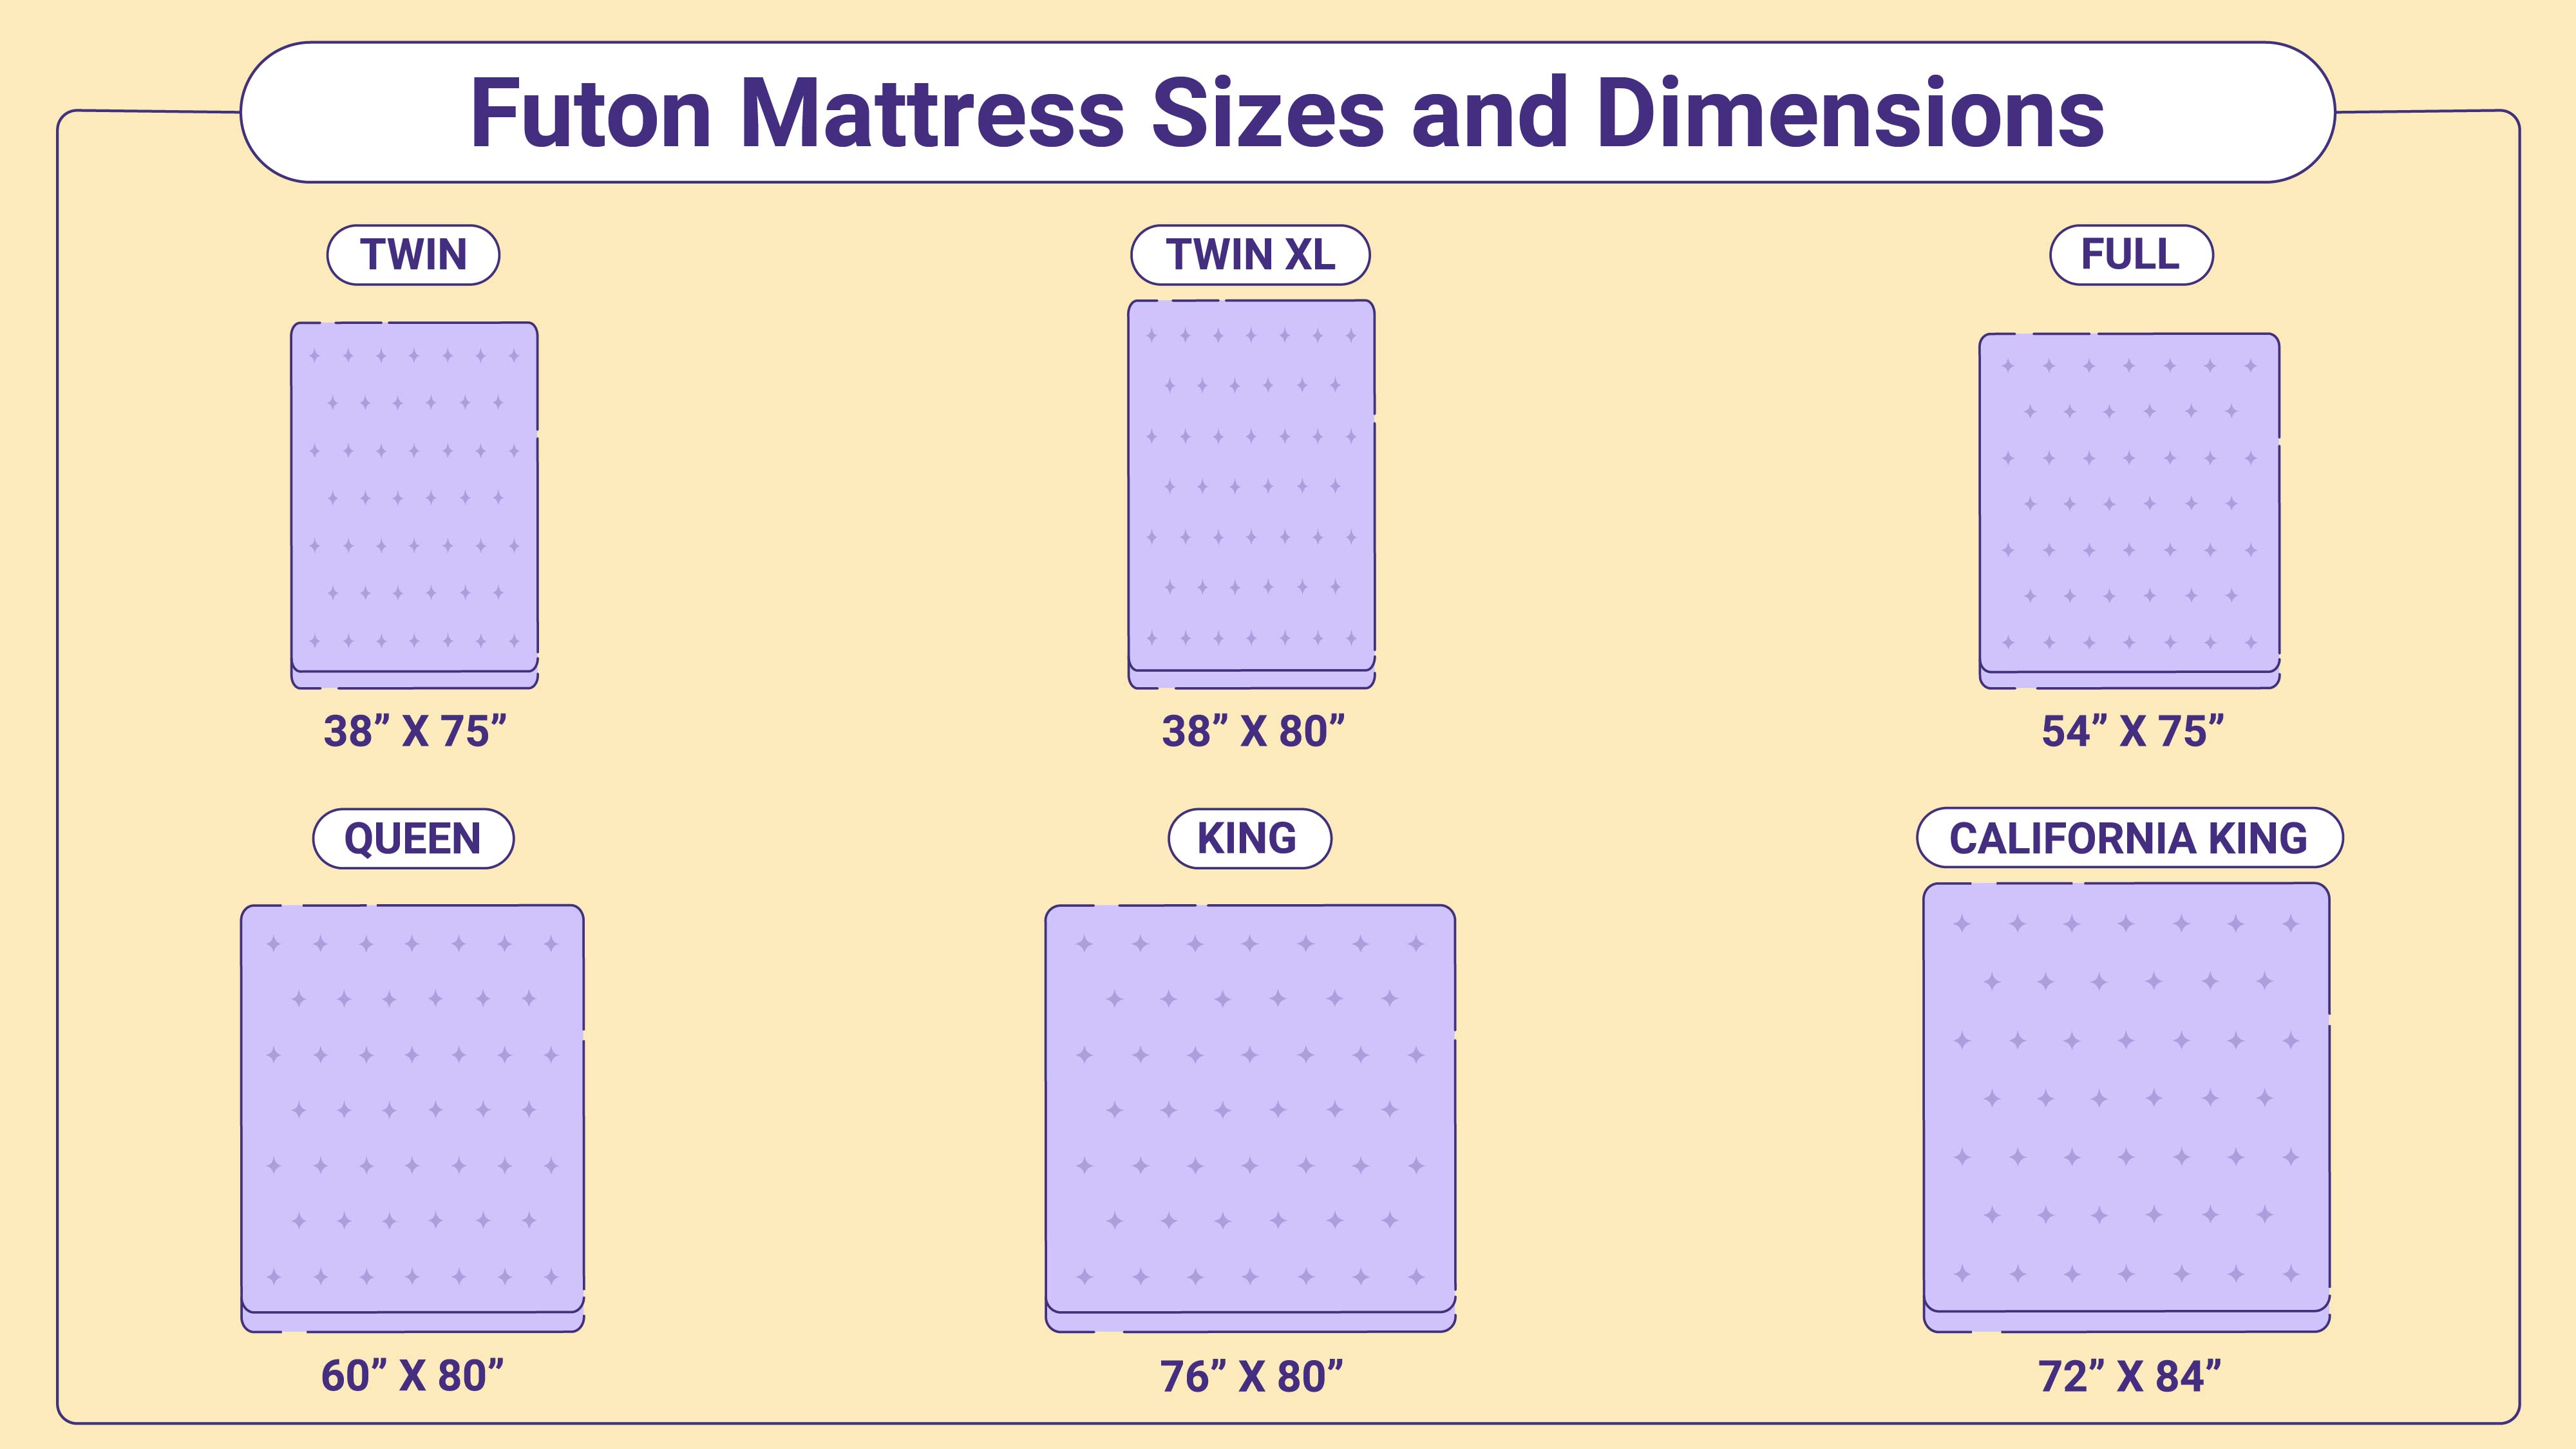 Futon Mattress Sizes And Dimensions, Sleep Train Twin Size Bed Dimensions